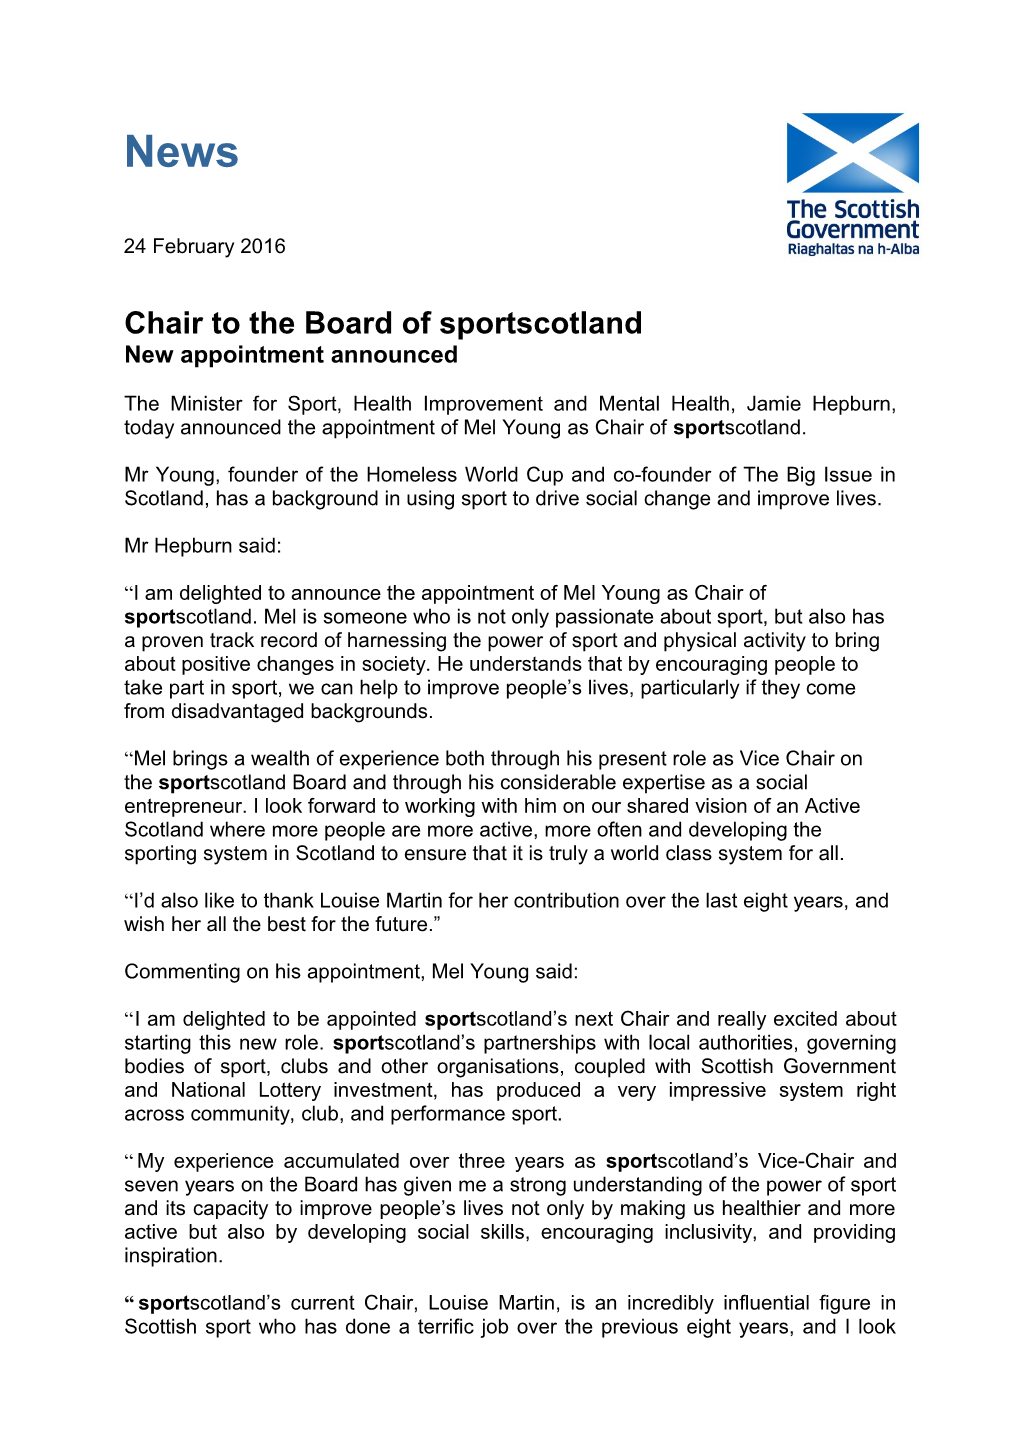 Chair to the Board of Sportscotland